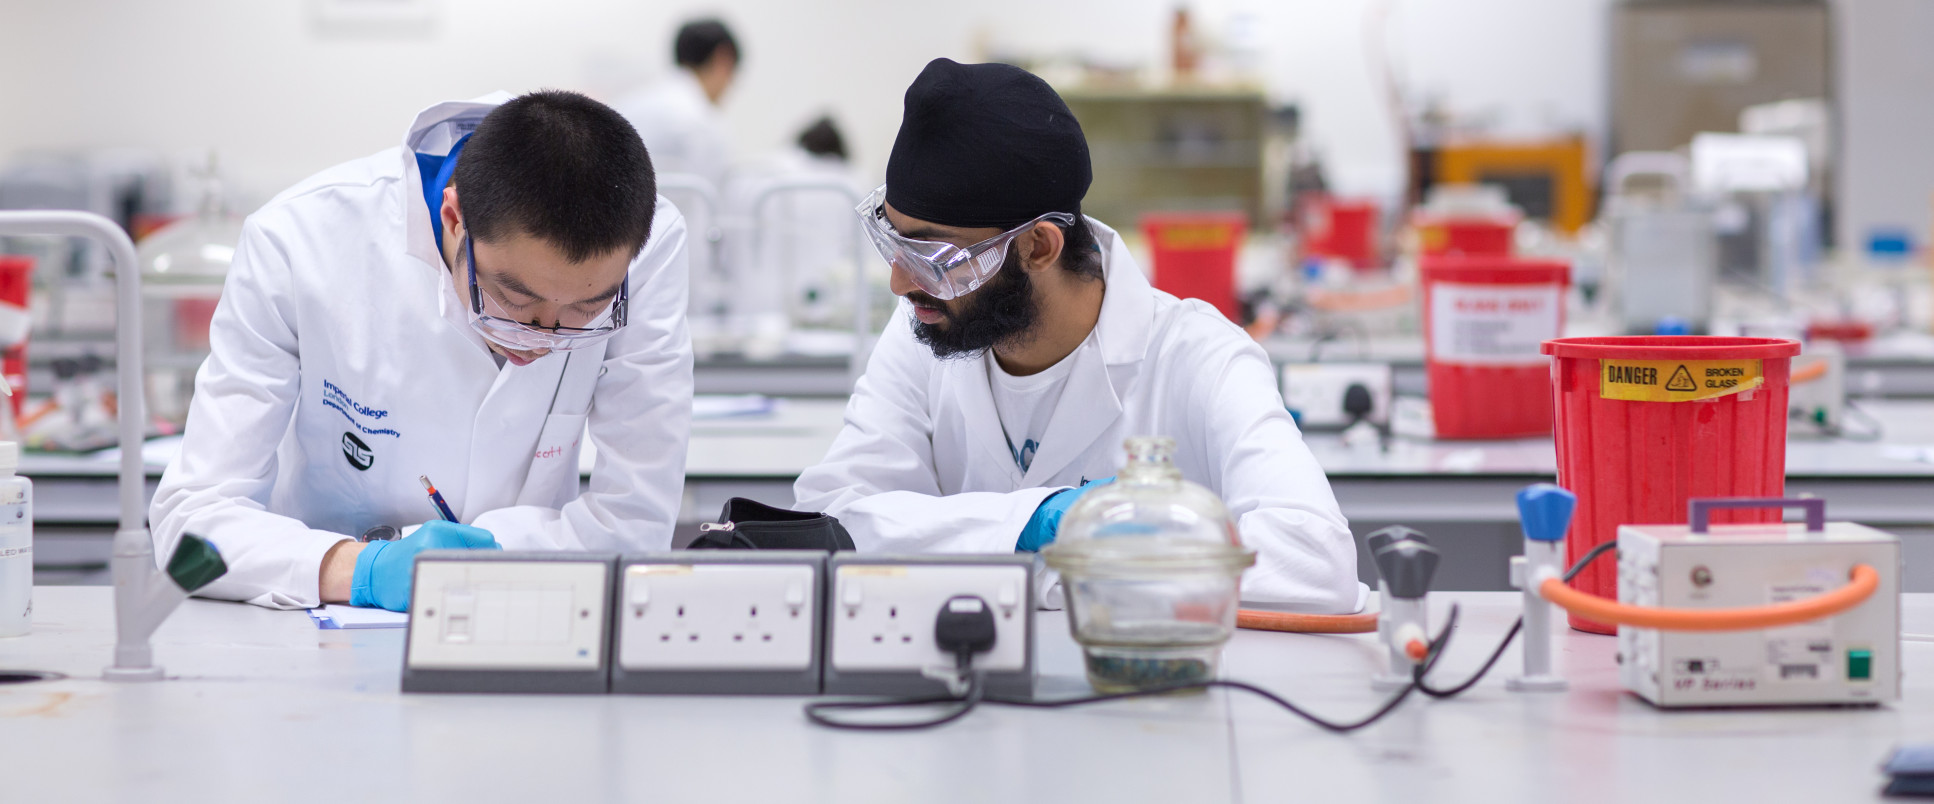 Students working in labs